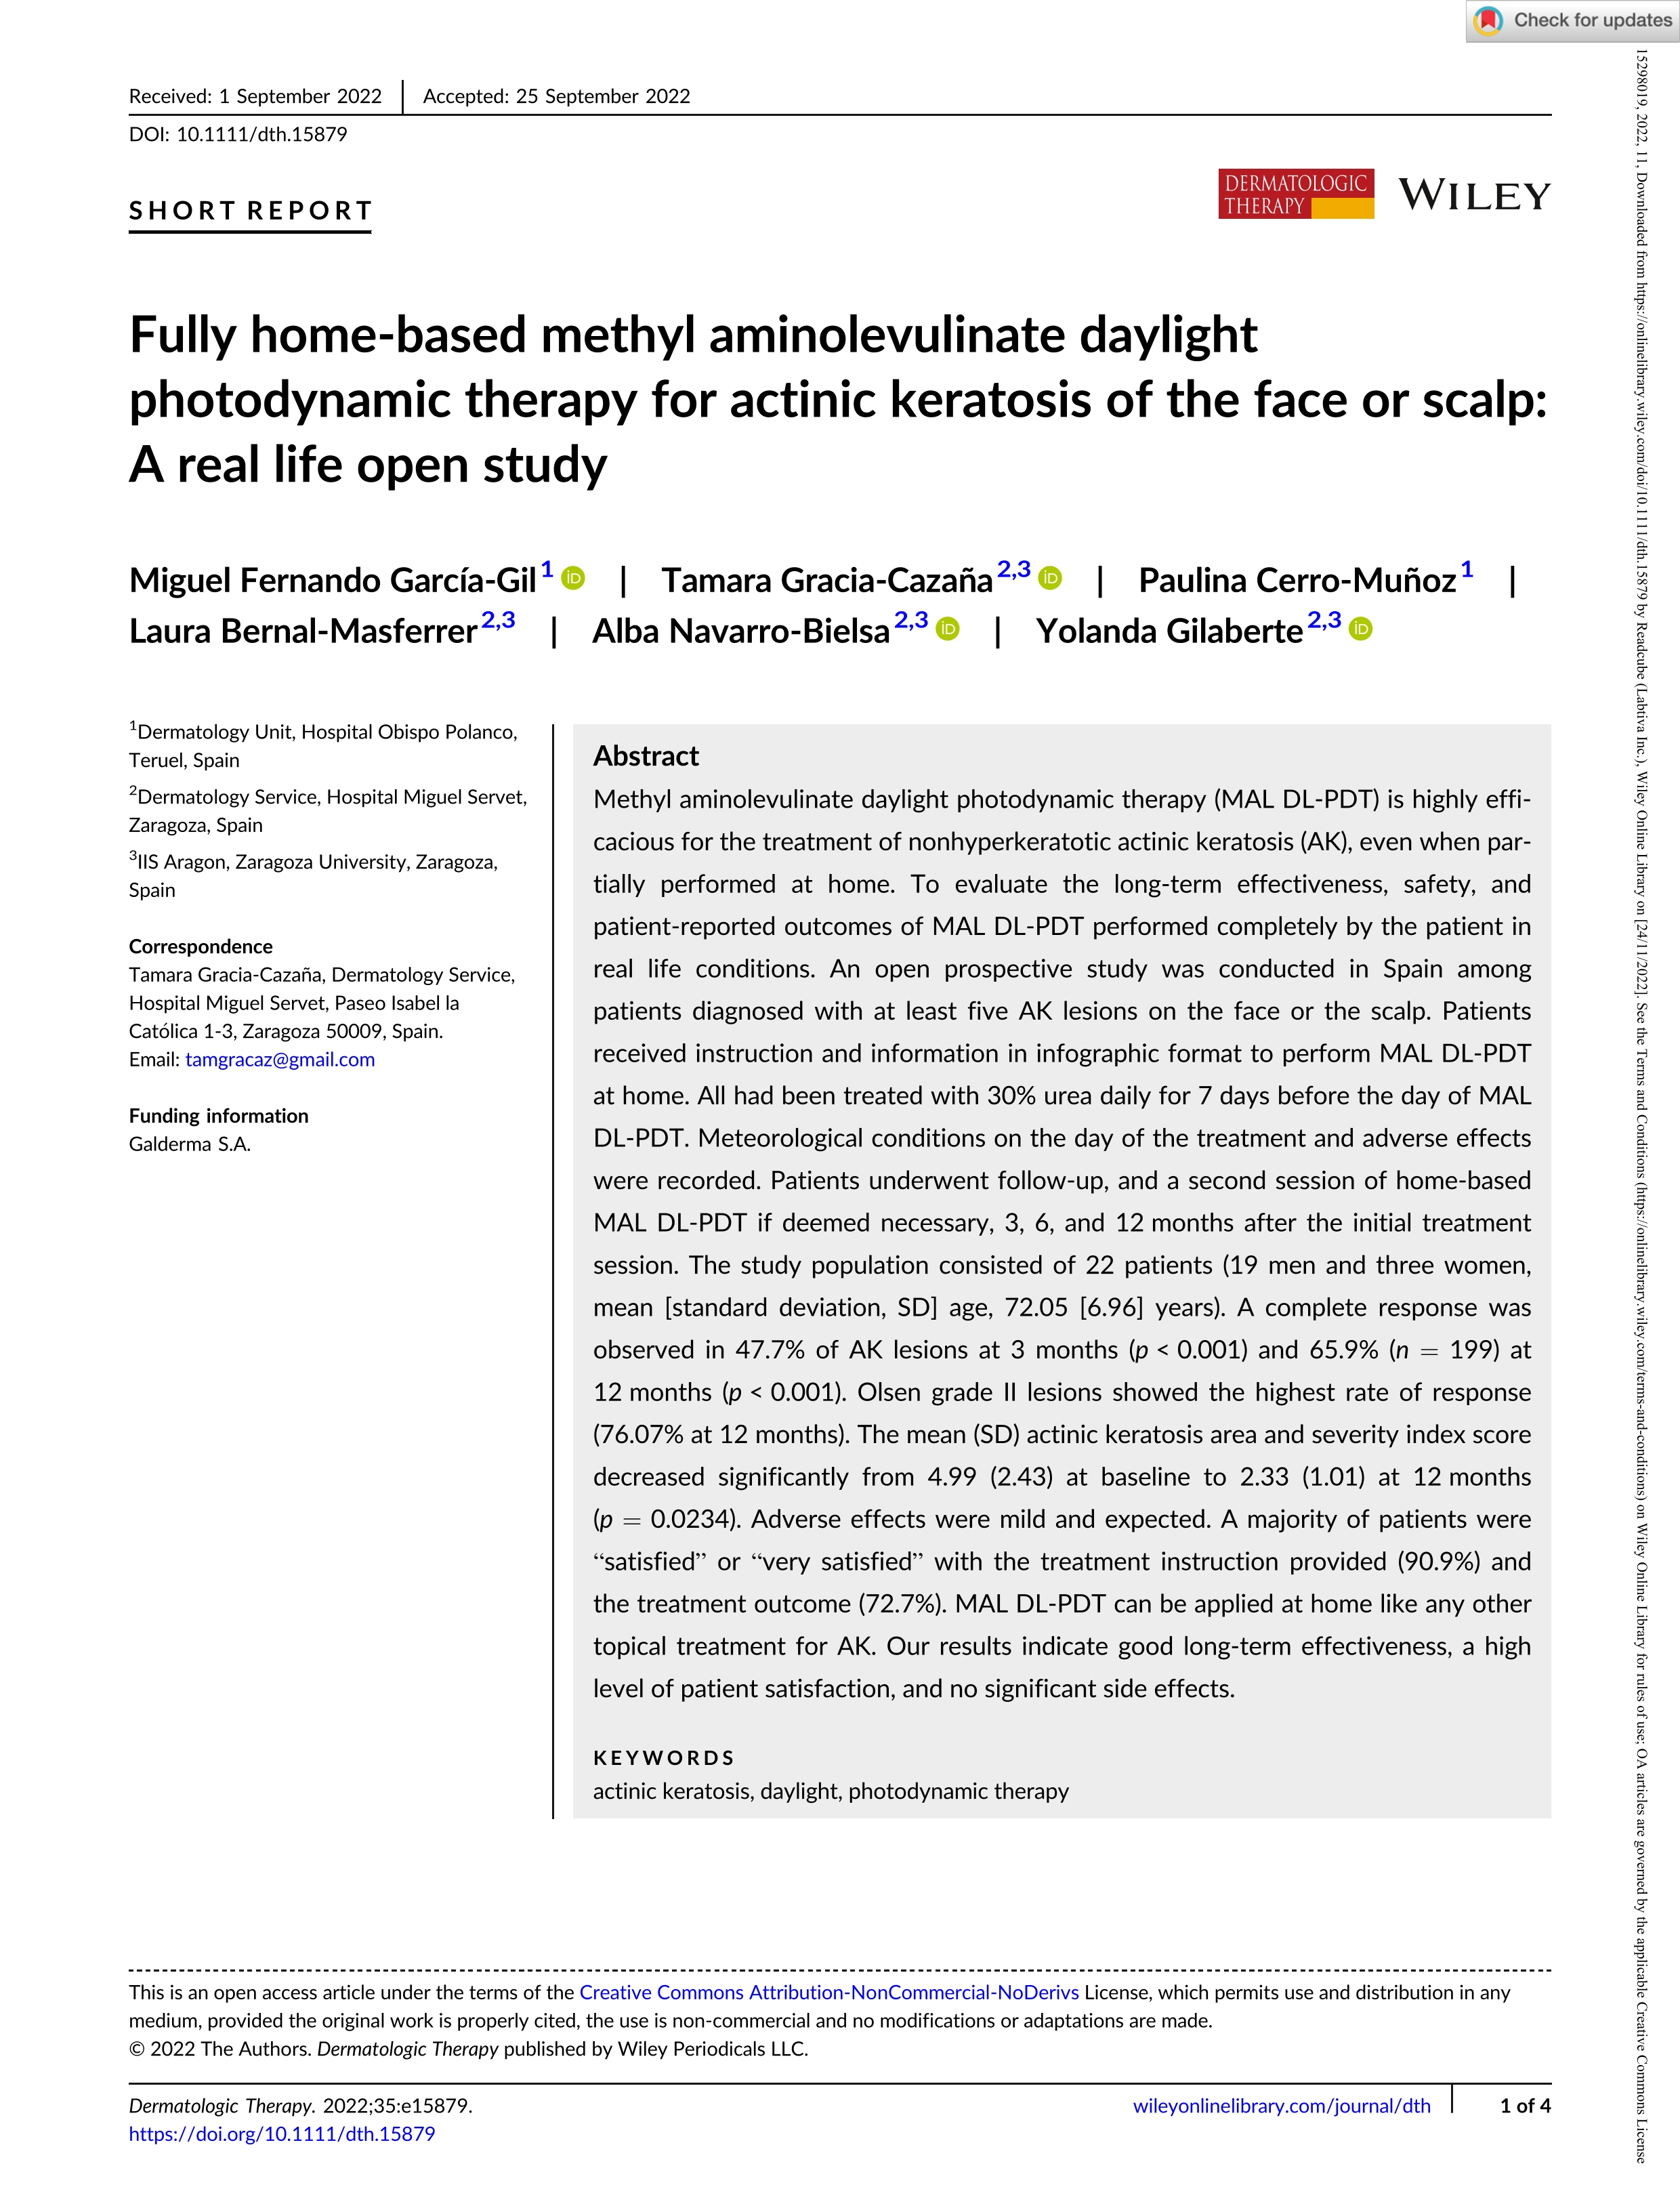 Fully home-based methyl aminolevulinate daylight photodynamic therapy for actinic keratosis of the face or scalp: A real life open study